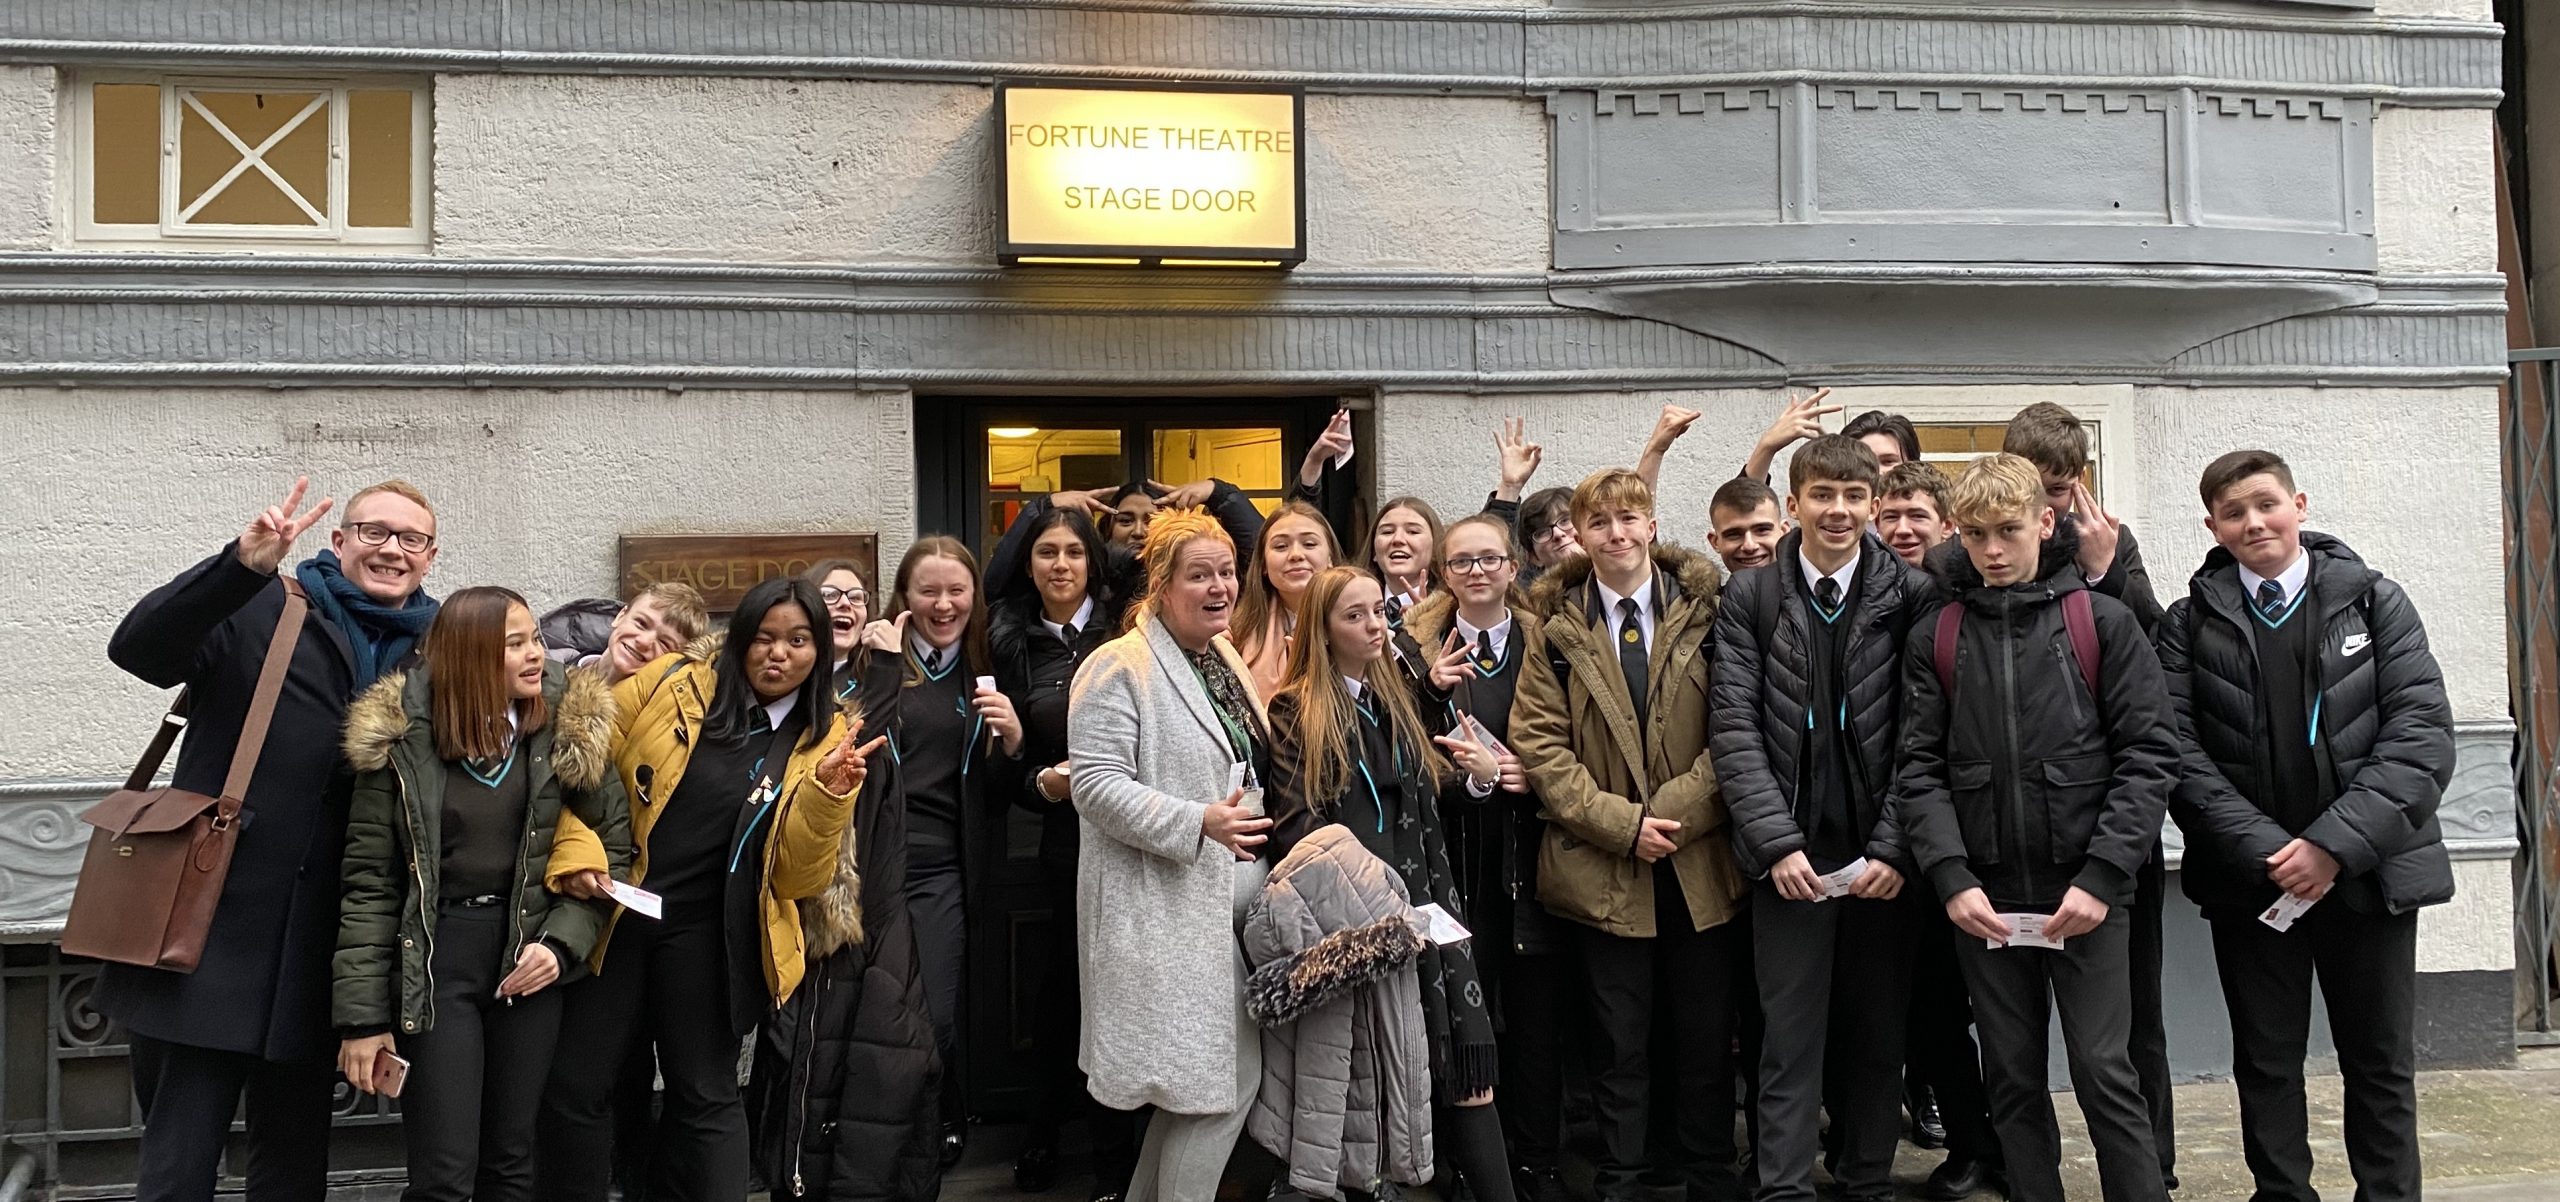 Park Academy West London uses Educational Visit Grant for theatre trip